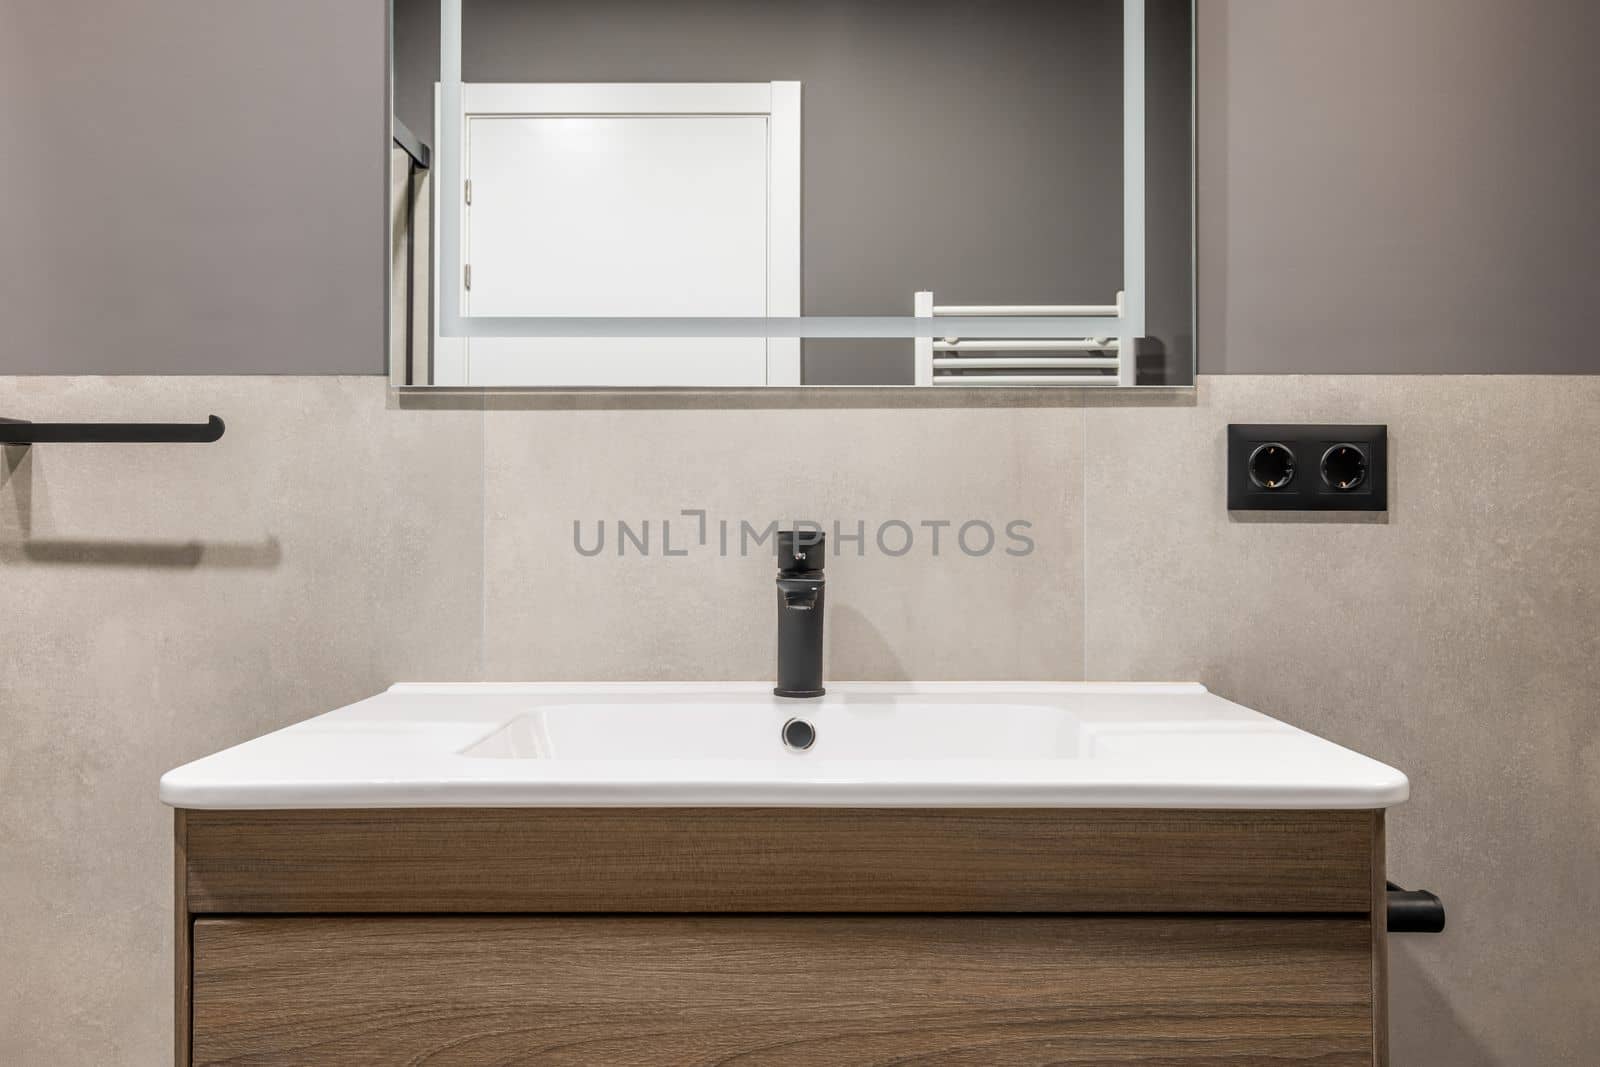 Square white ceramic sink on wooden table with drawers. On wall is mirror with white neon lighting. Mirror reflects white door and towel radiator. Walls are combination of marble tiles and gray paint